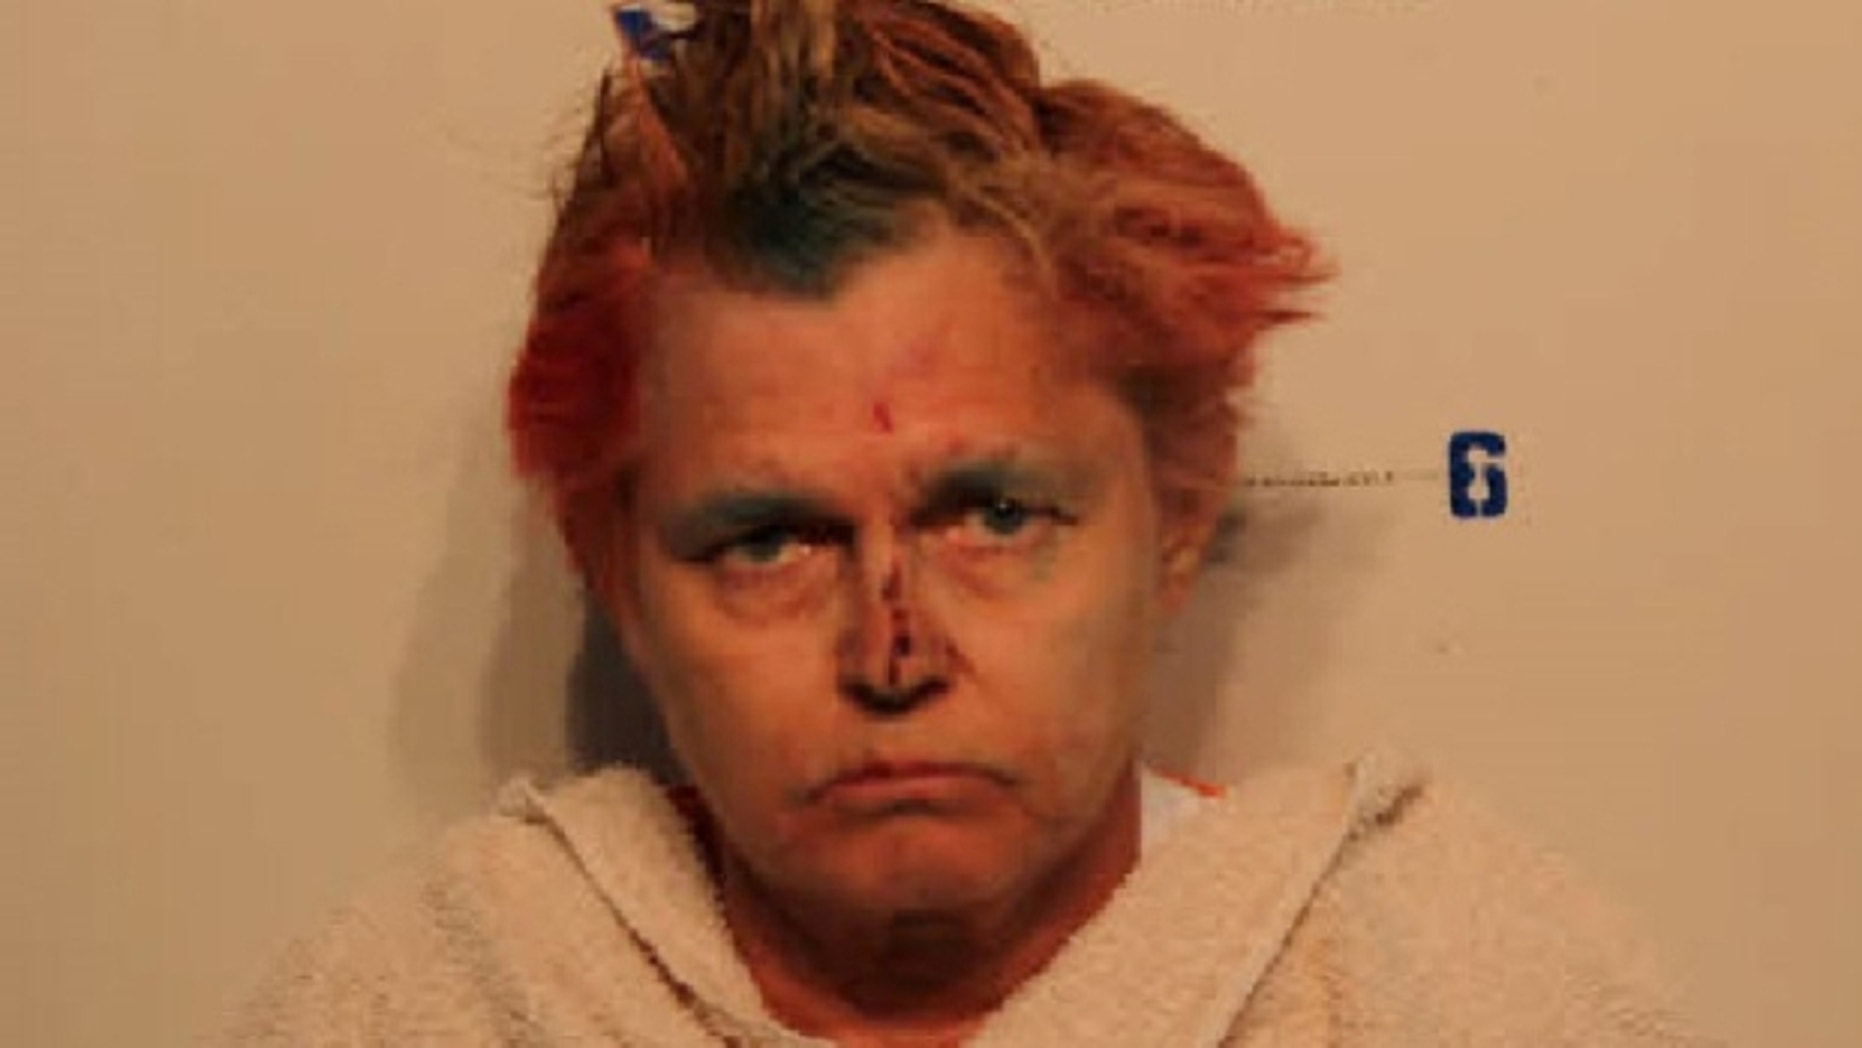 Texas woman, 61, arrested after driving tractor in July 4 parade without permission